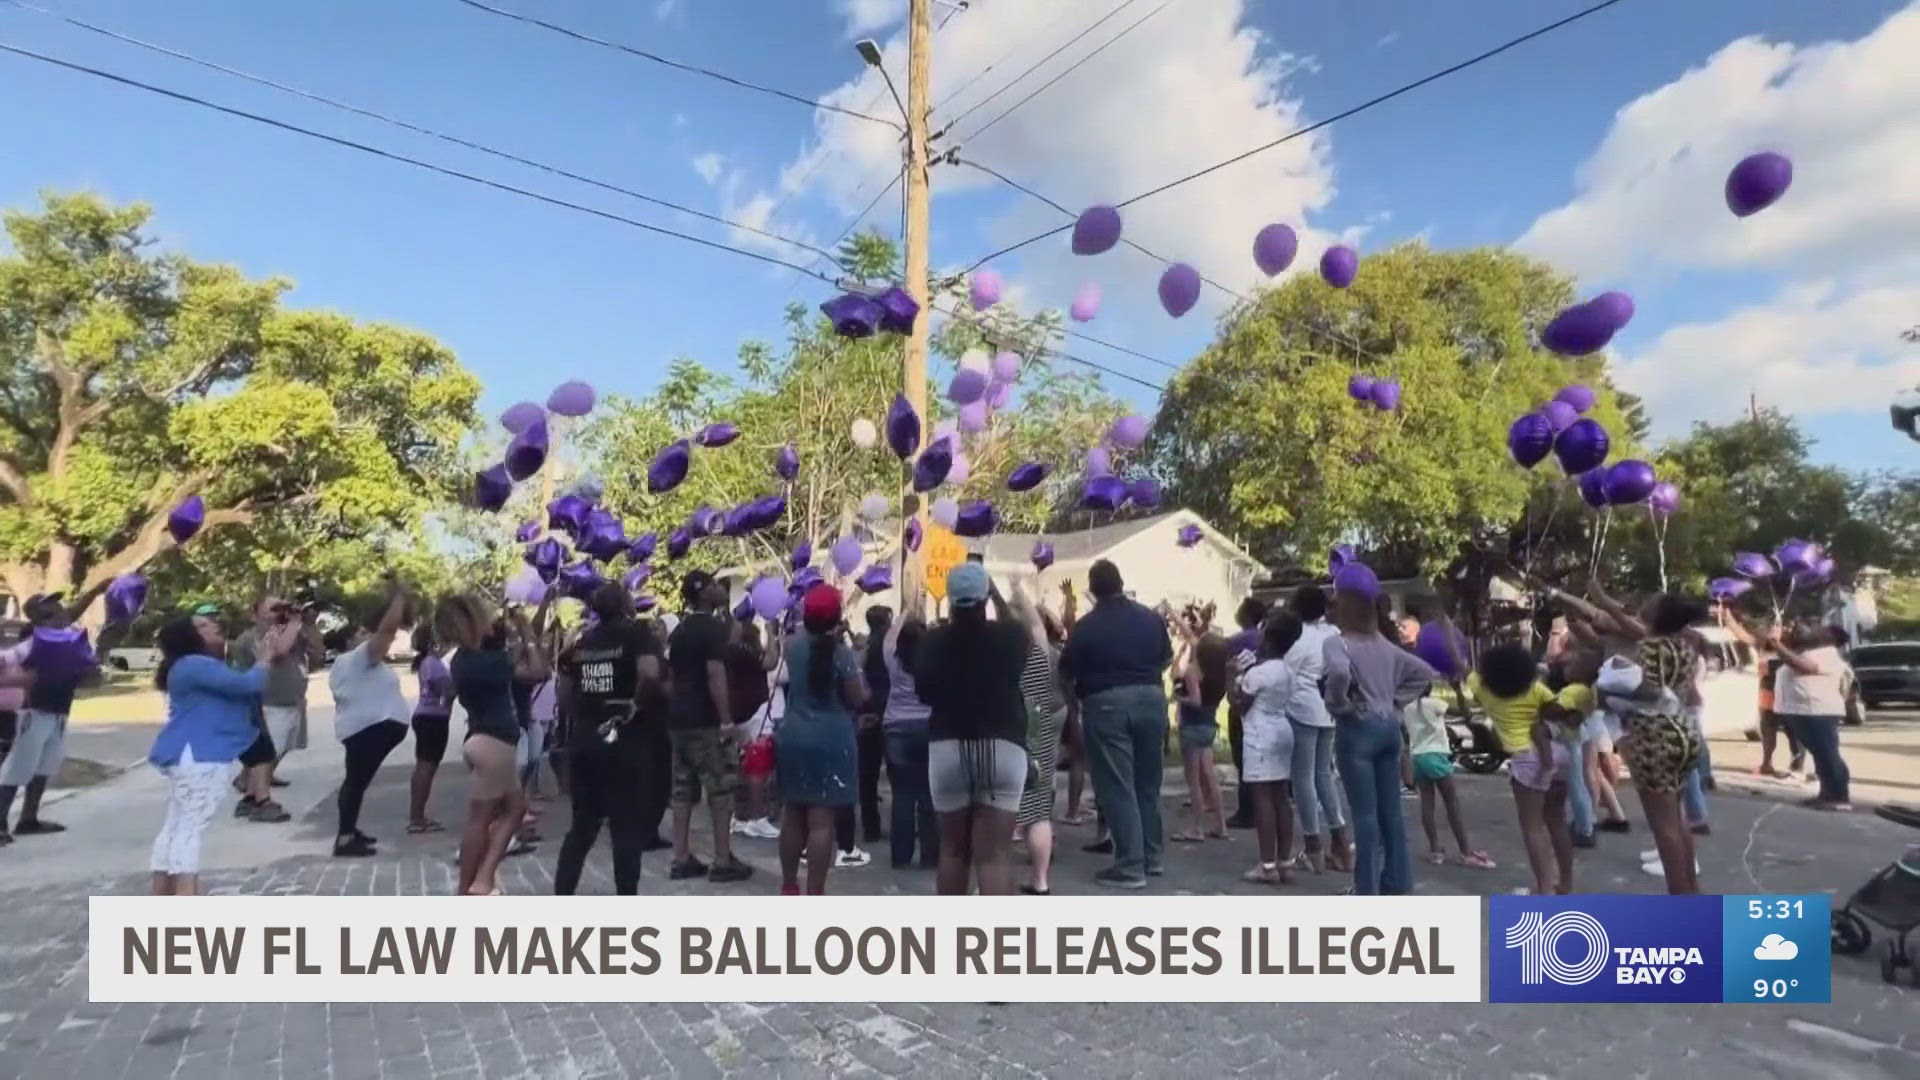 The bill signed by Gov. Ron DeSantis makes releasing balloons a littering offense punishable with fines because balloons threaten wildlife.